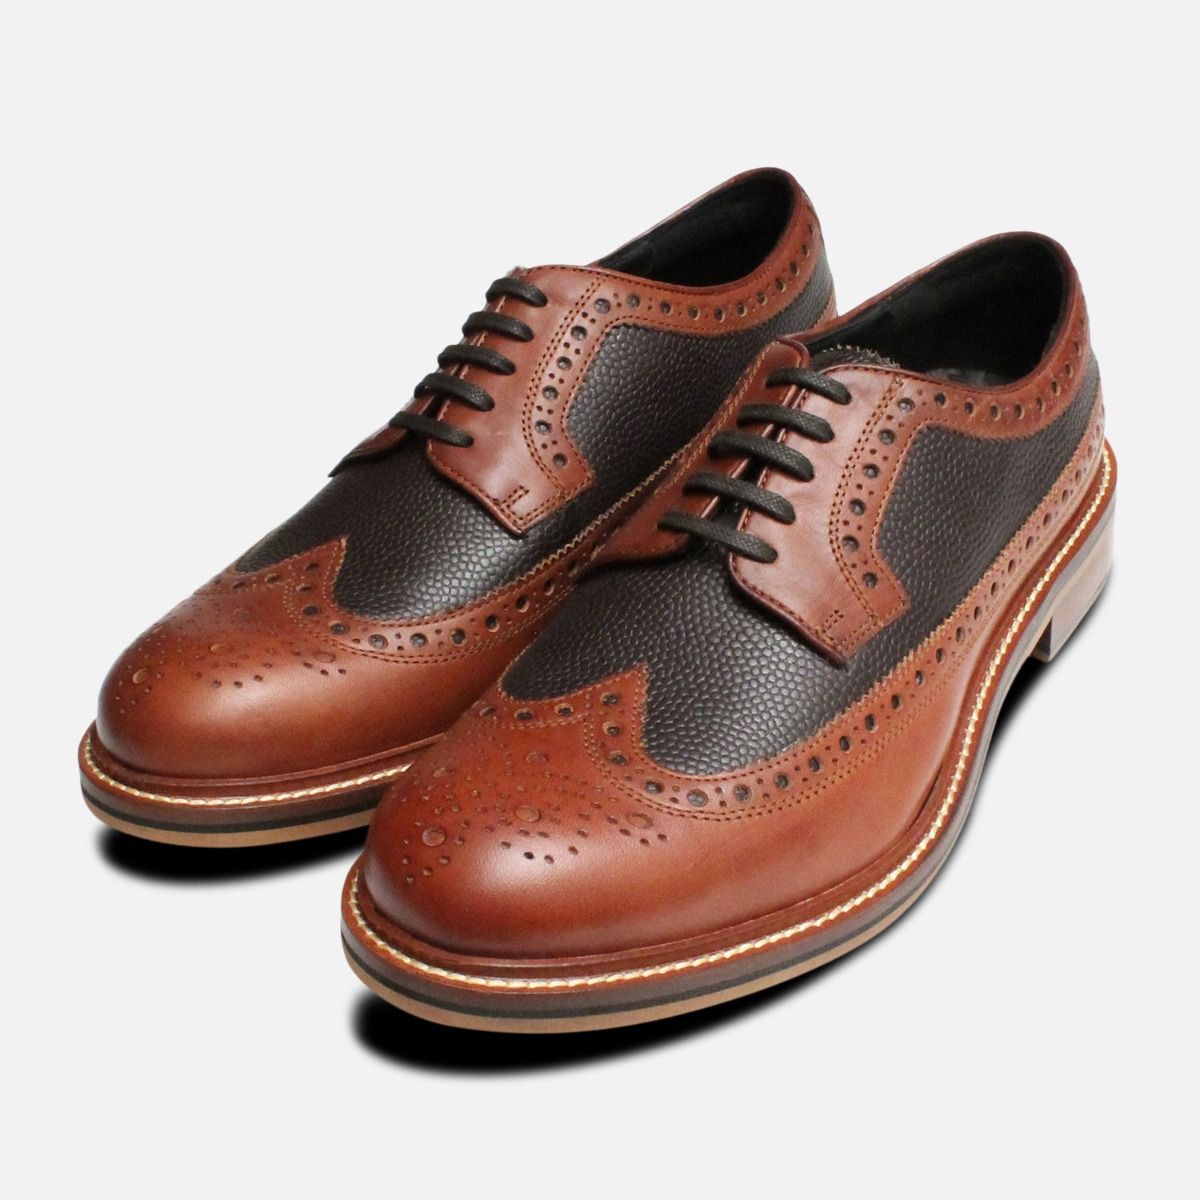 Tan Wingtip Two Tone Brogues by Thomas 